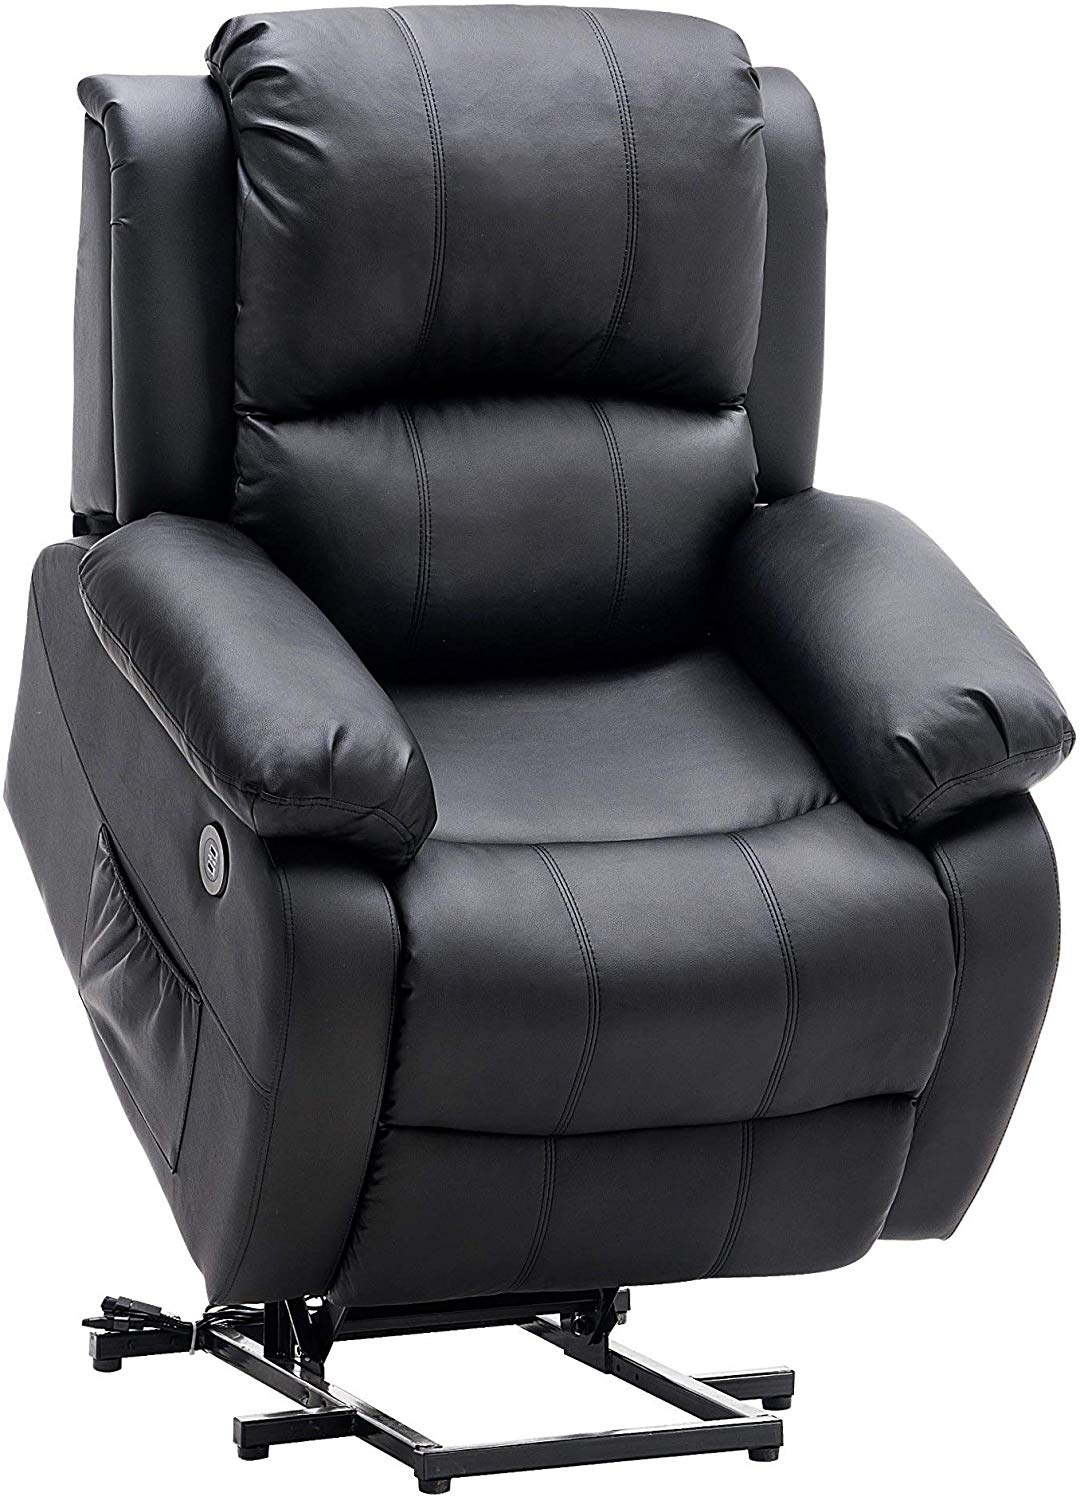 Mcombo Small Sized Electric Power Lift Recliner